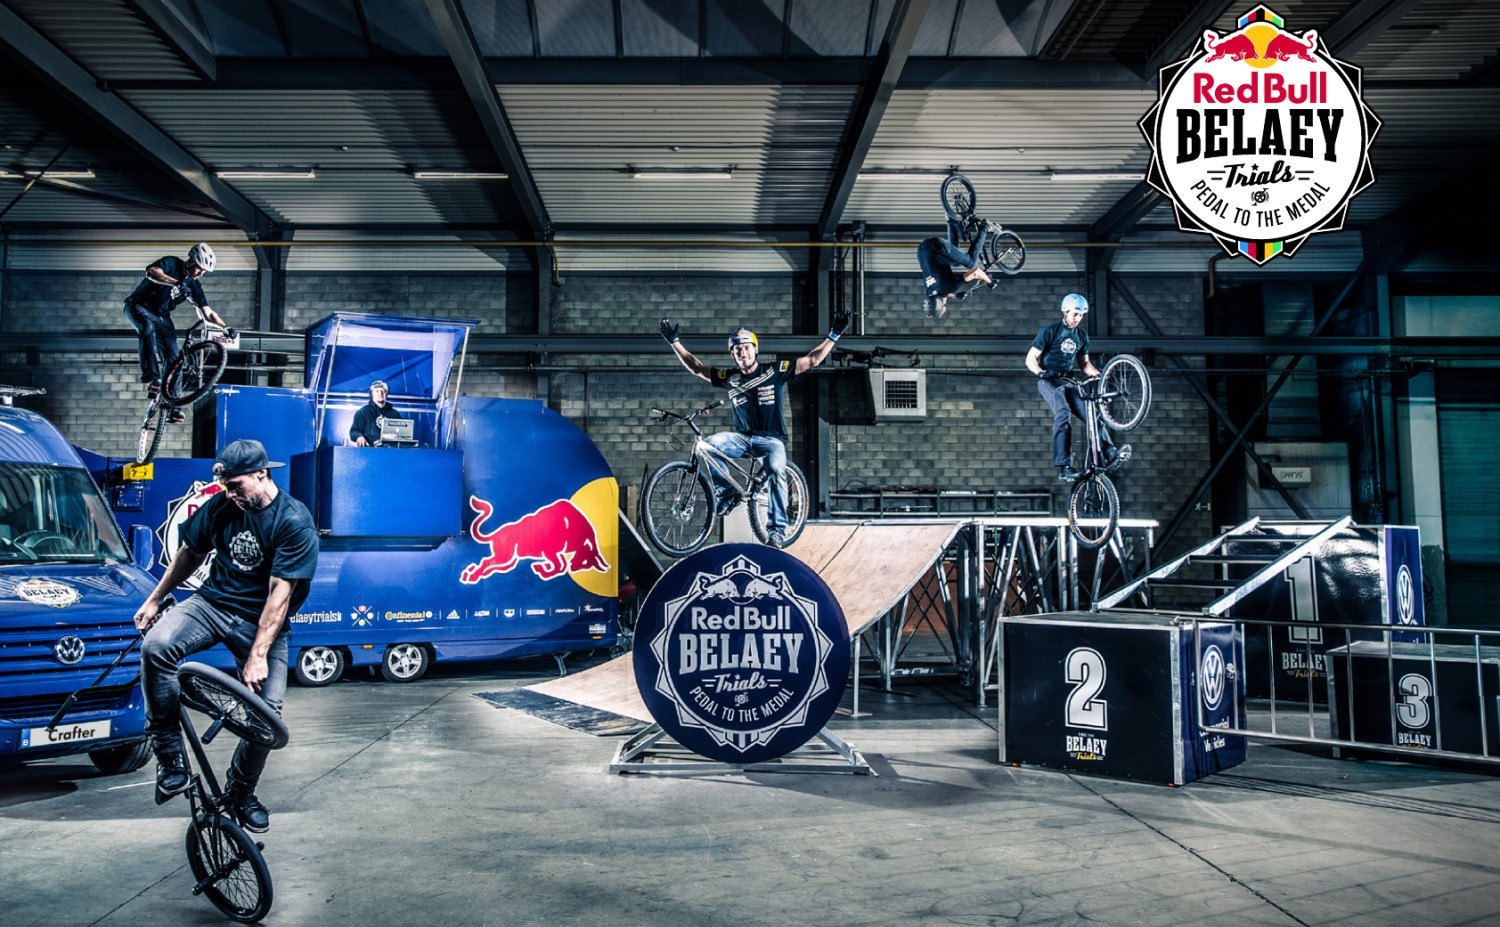 Red Bull Belaey Trials Pedal to the Medal